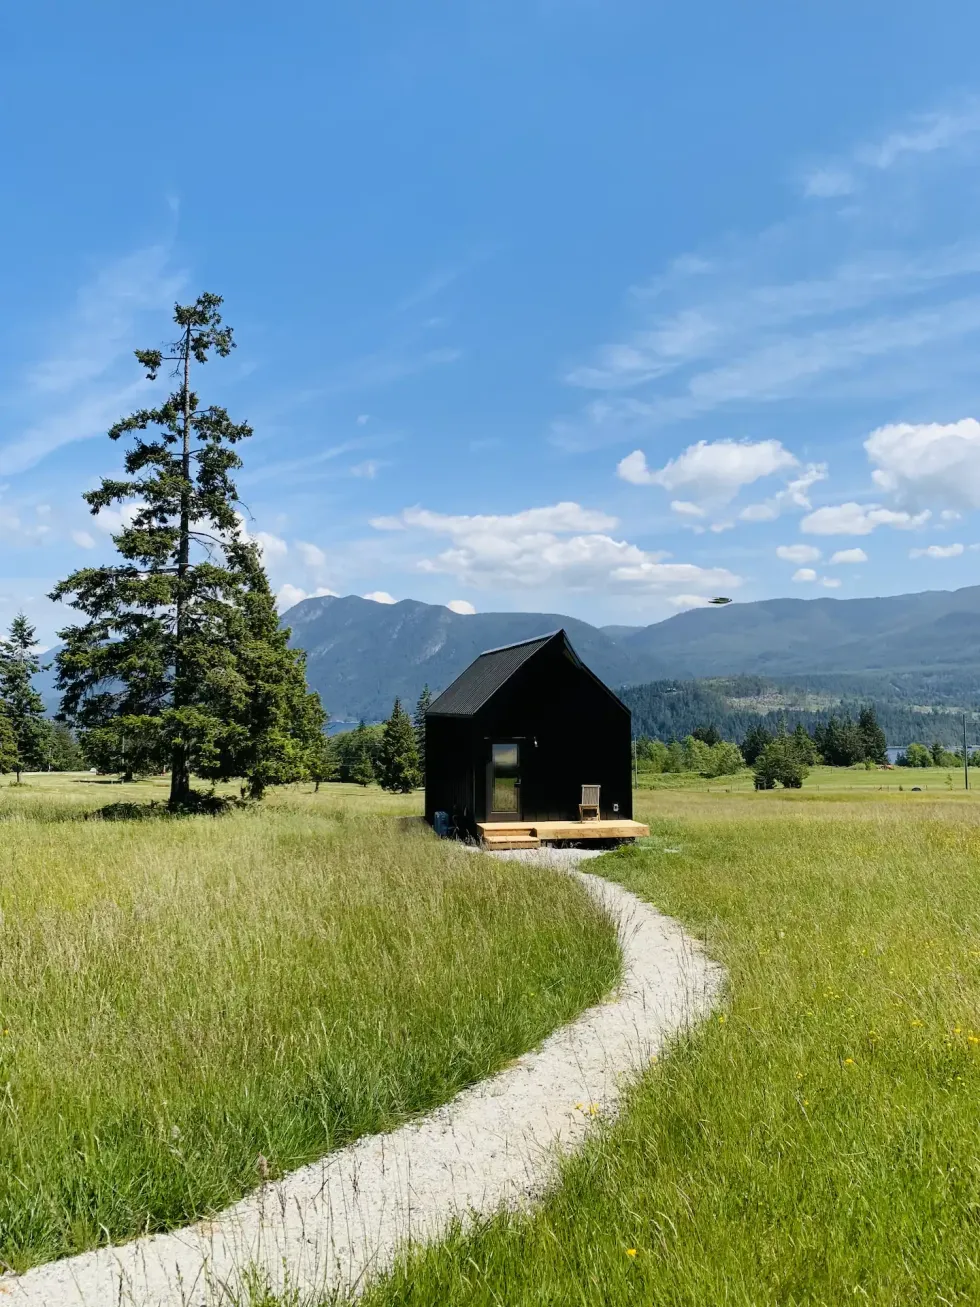 A black cabin sitting in a field of grass with trees and mountains in the distance.